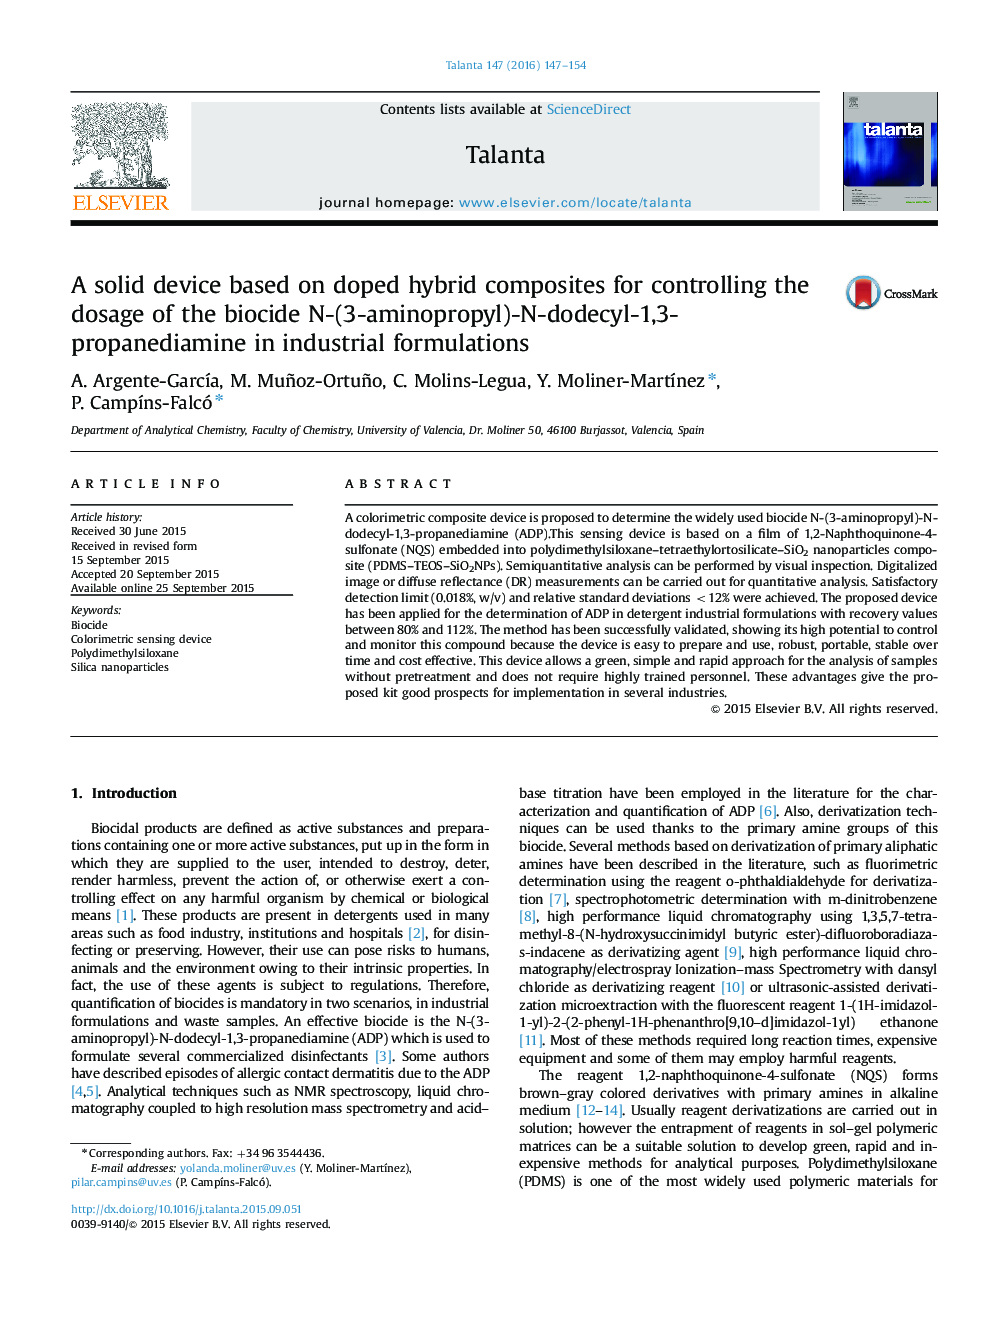 A solid device based on doped hybrid composites for controlling the dosage of the biocide N-(3-aminopropyl)-N-dodecyl-1,3-propanediamine in industrial formulations